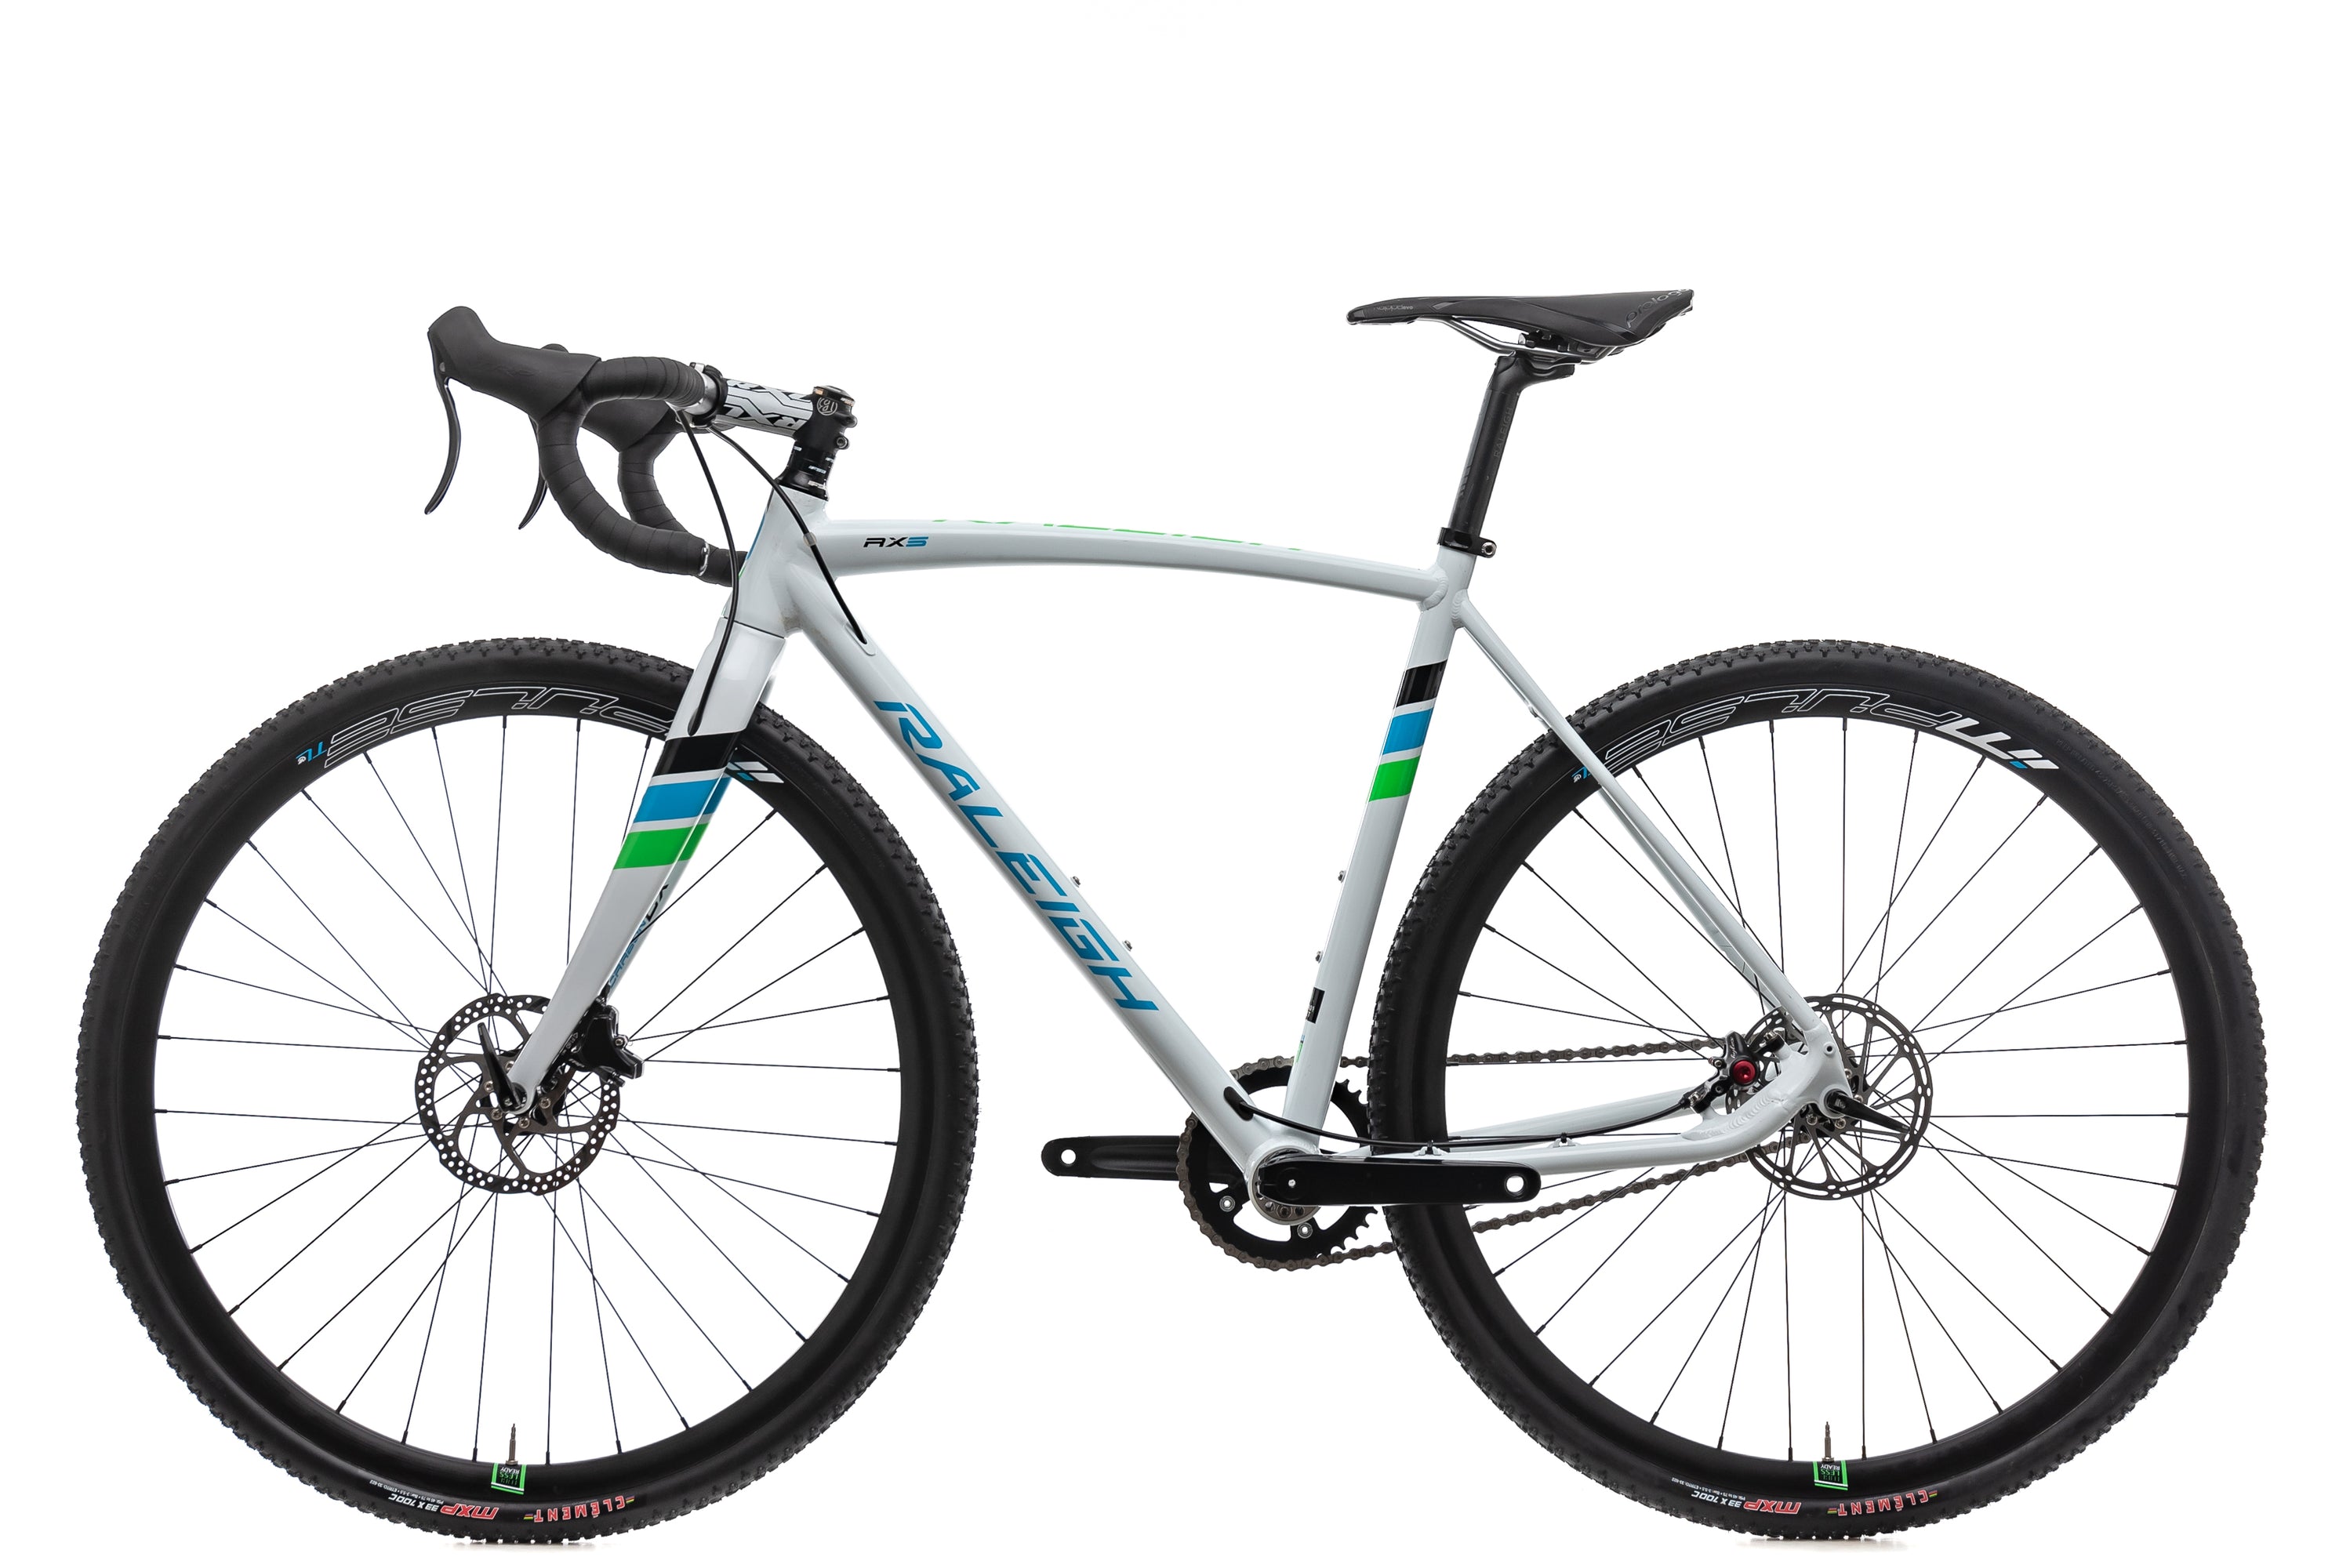 Raleigh RXS Cyclocross Bike - 2017, 52cm non-drive side